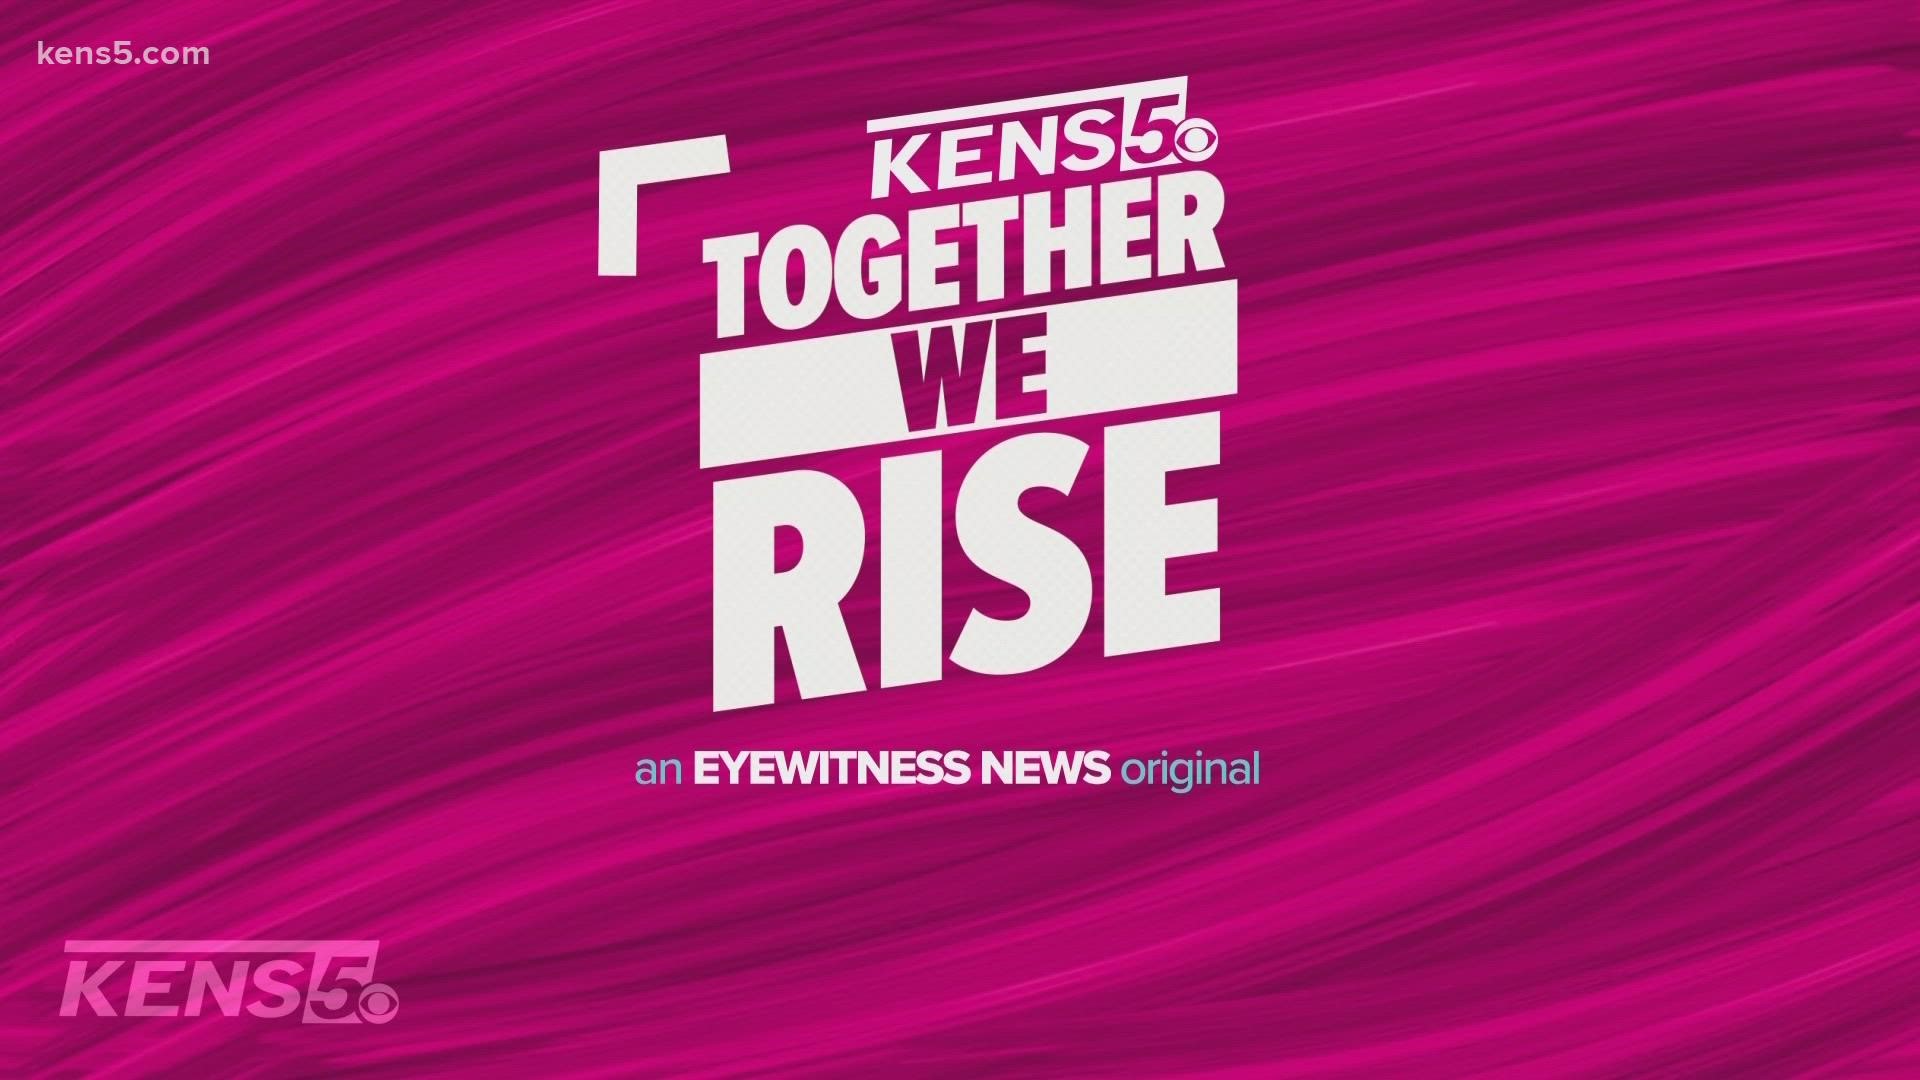 The KENS 5 News team presents "Together We Rise," a special conversation about race and cultural challenges in the San Antonio community.